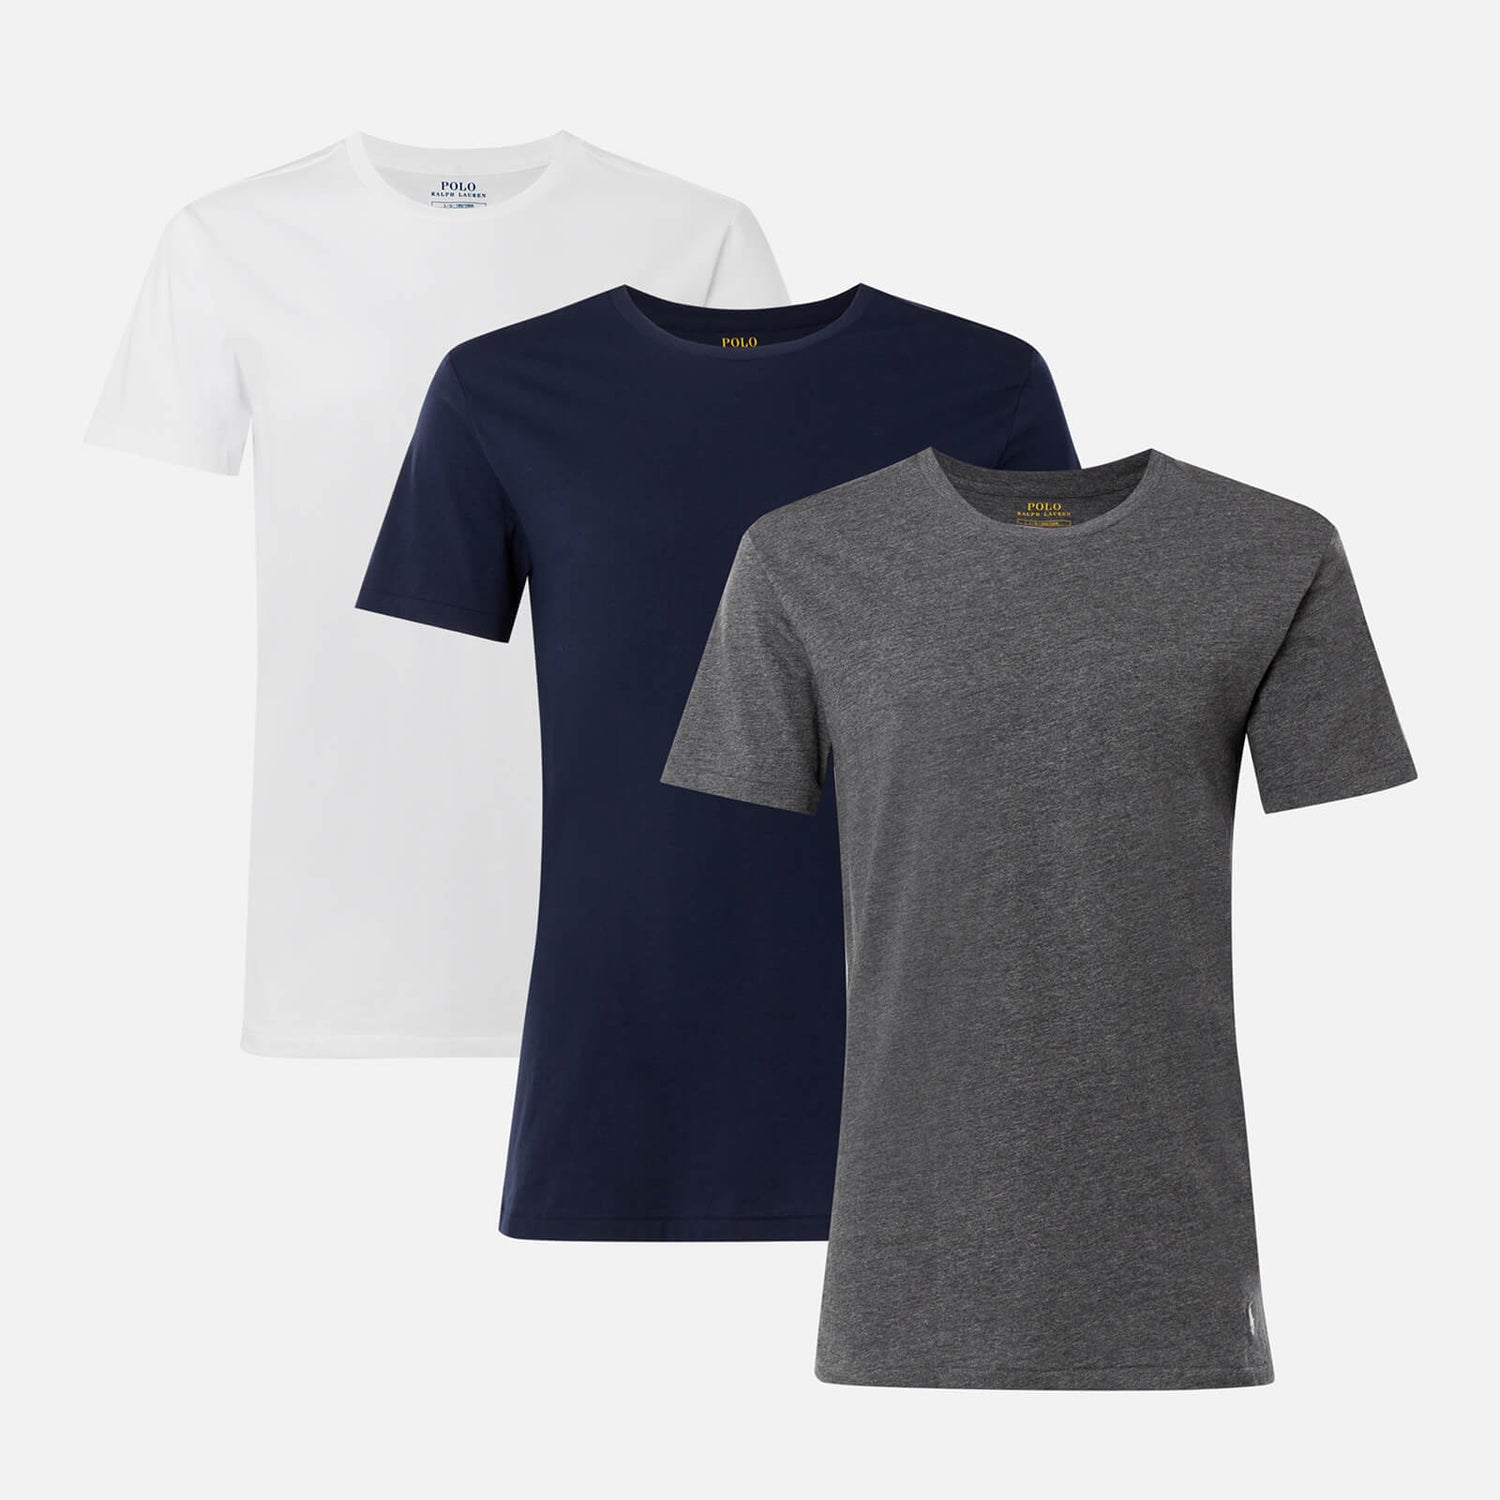 Polo Ralph Lauren Men's 3-Pack T-Shirts - Navy/Charcoal Heather/White - S